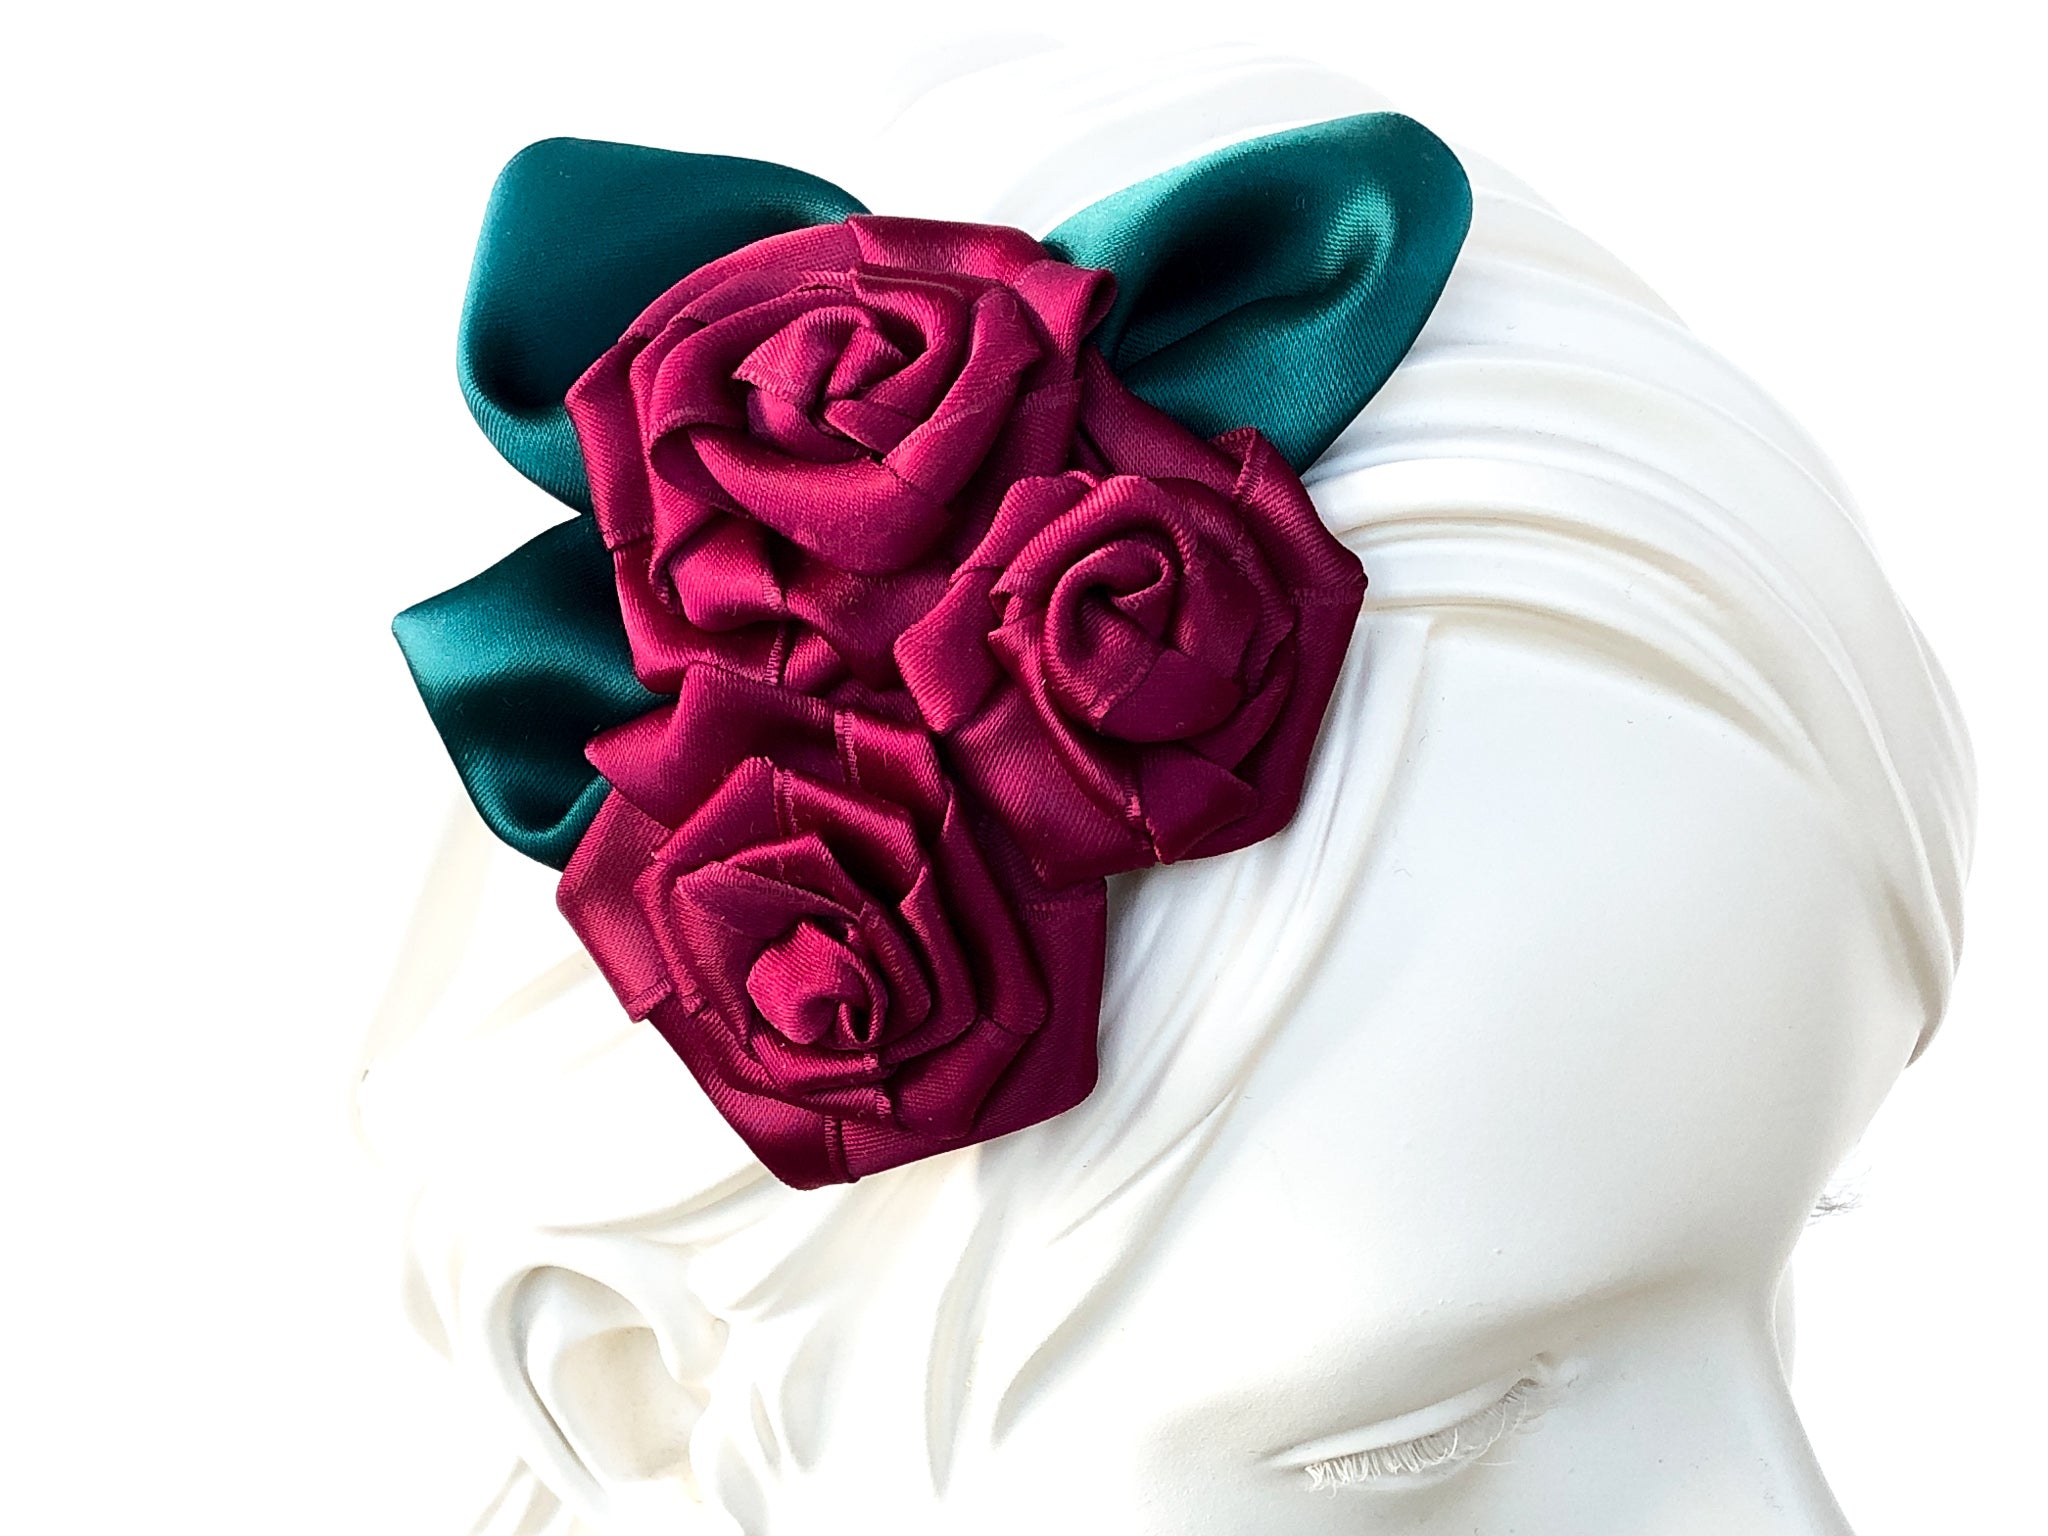 Fascinator Hair flowers with deep red Roses with dark green leaves.